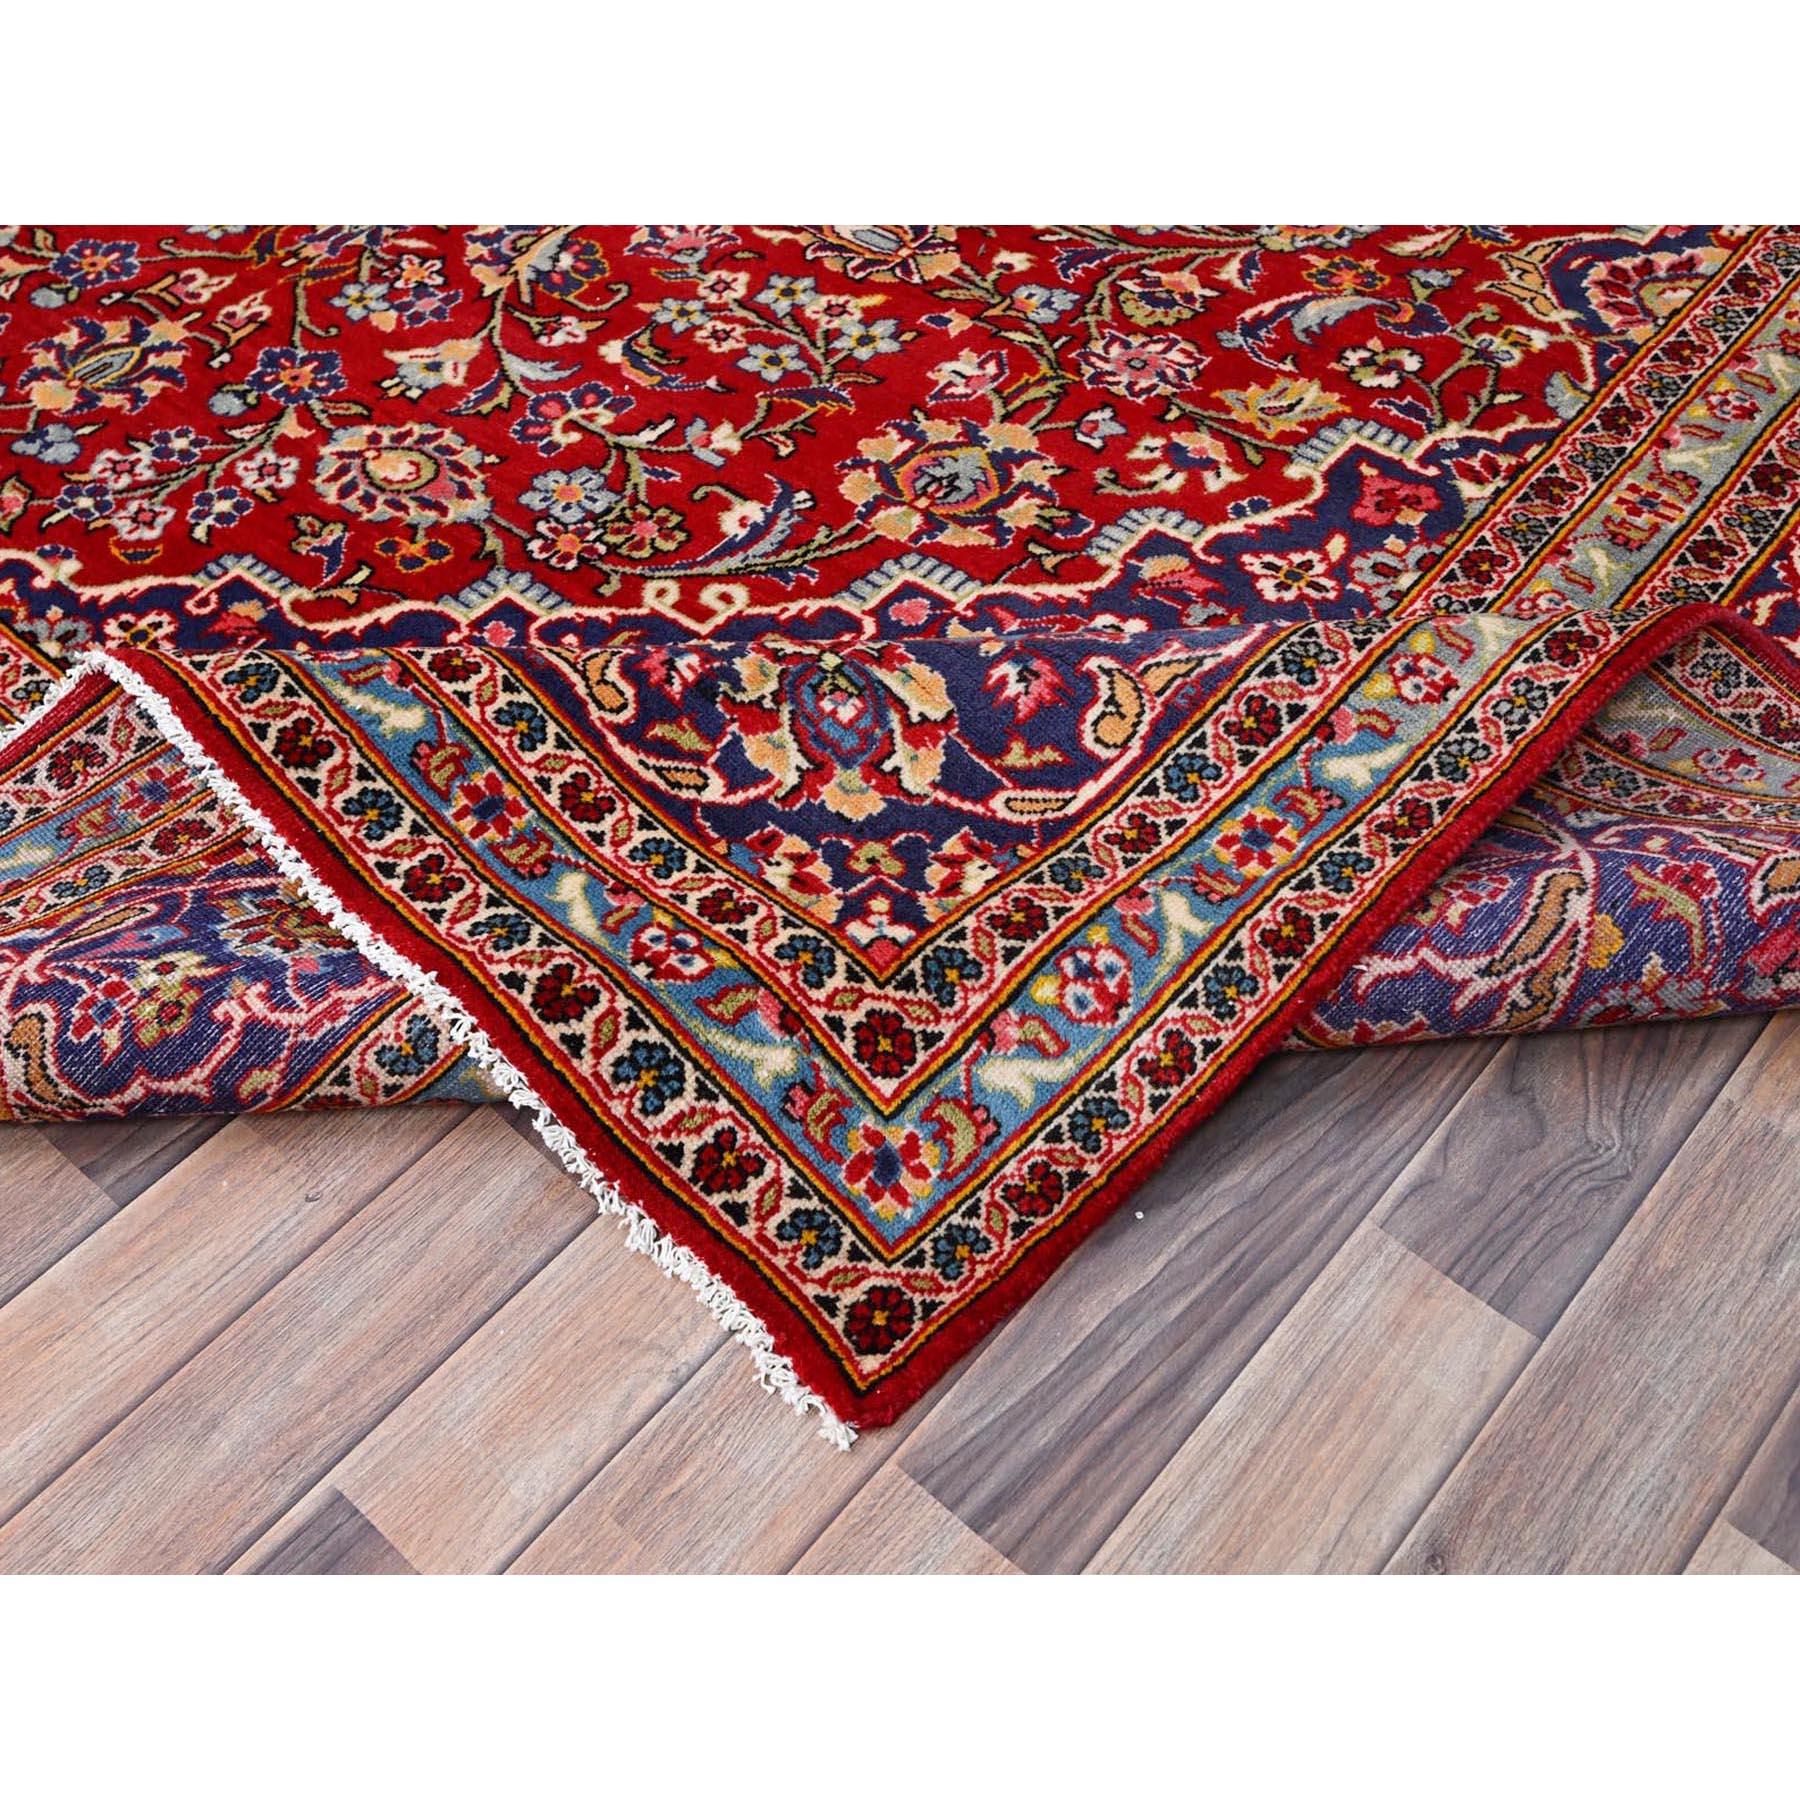 Red Clean Soft Vintage Persian Kashan Full Pile Hand Knotted Organic Wool Rug 1